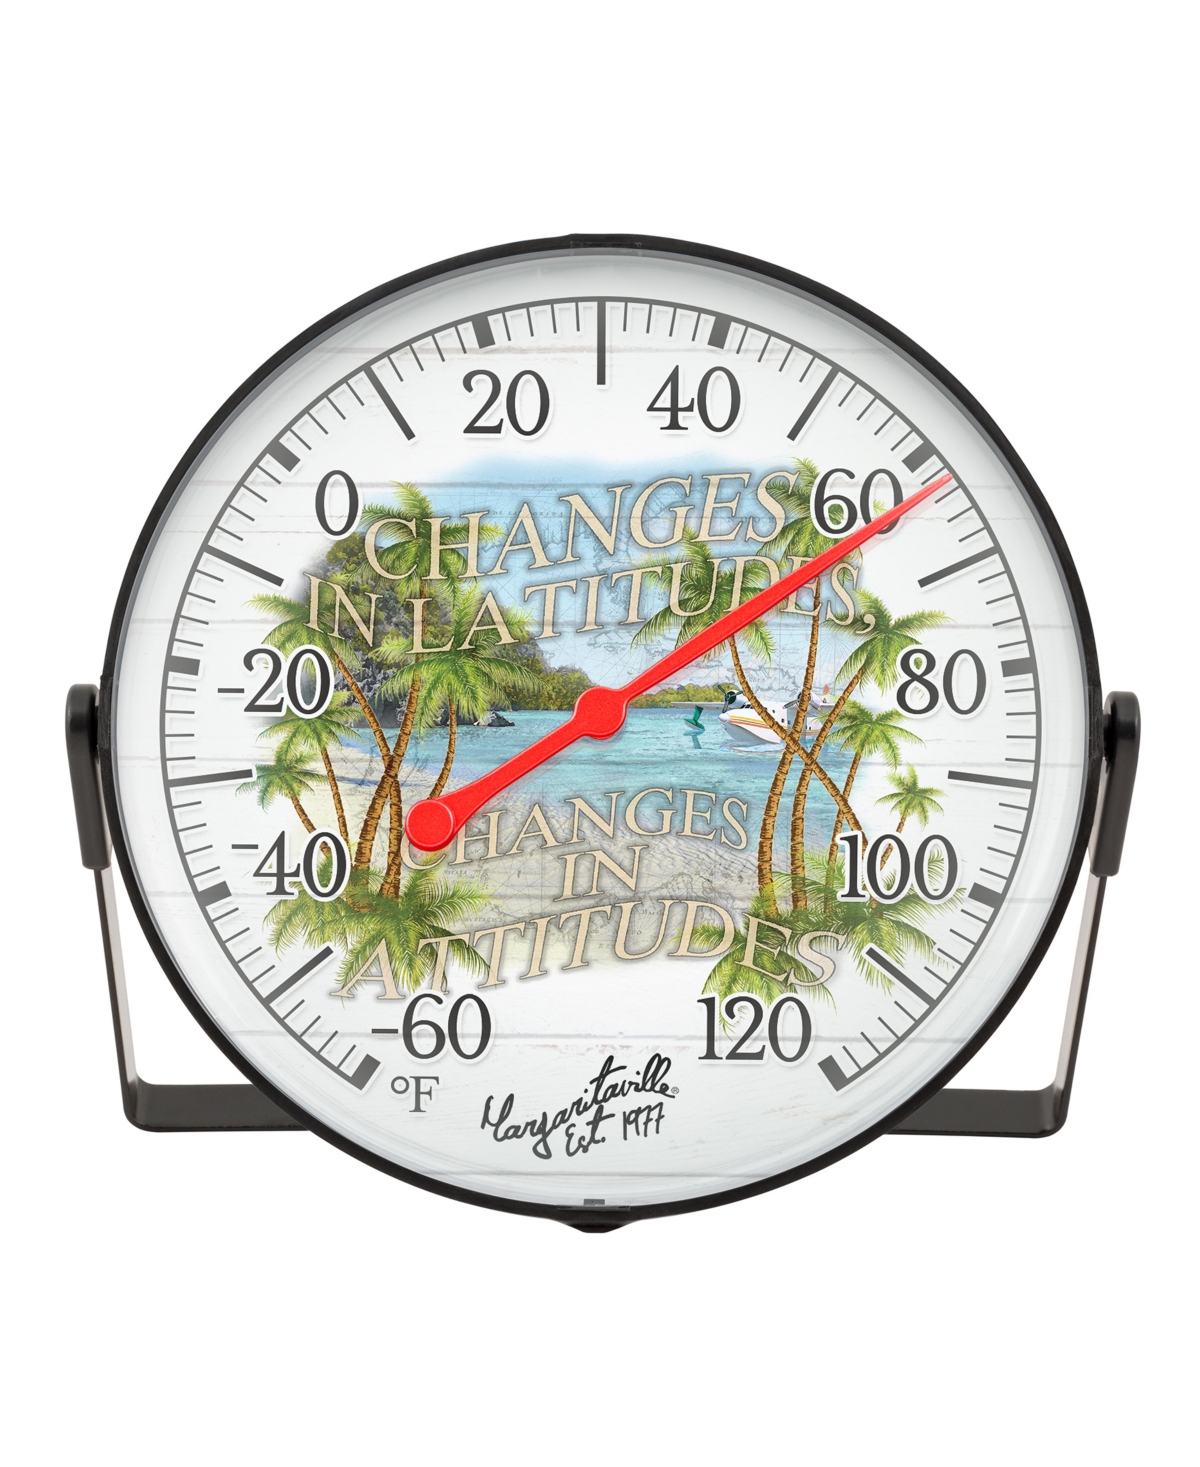 La Crosse Technology 104-20747mv-int "changes In Latitudes, Changes In Attitudes" Margaritaville 5" Bracket Dial Thermome In Multi